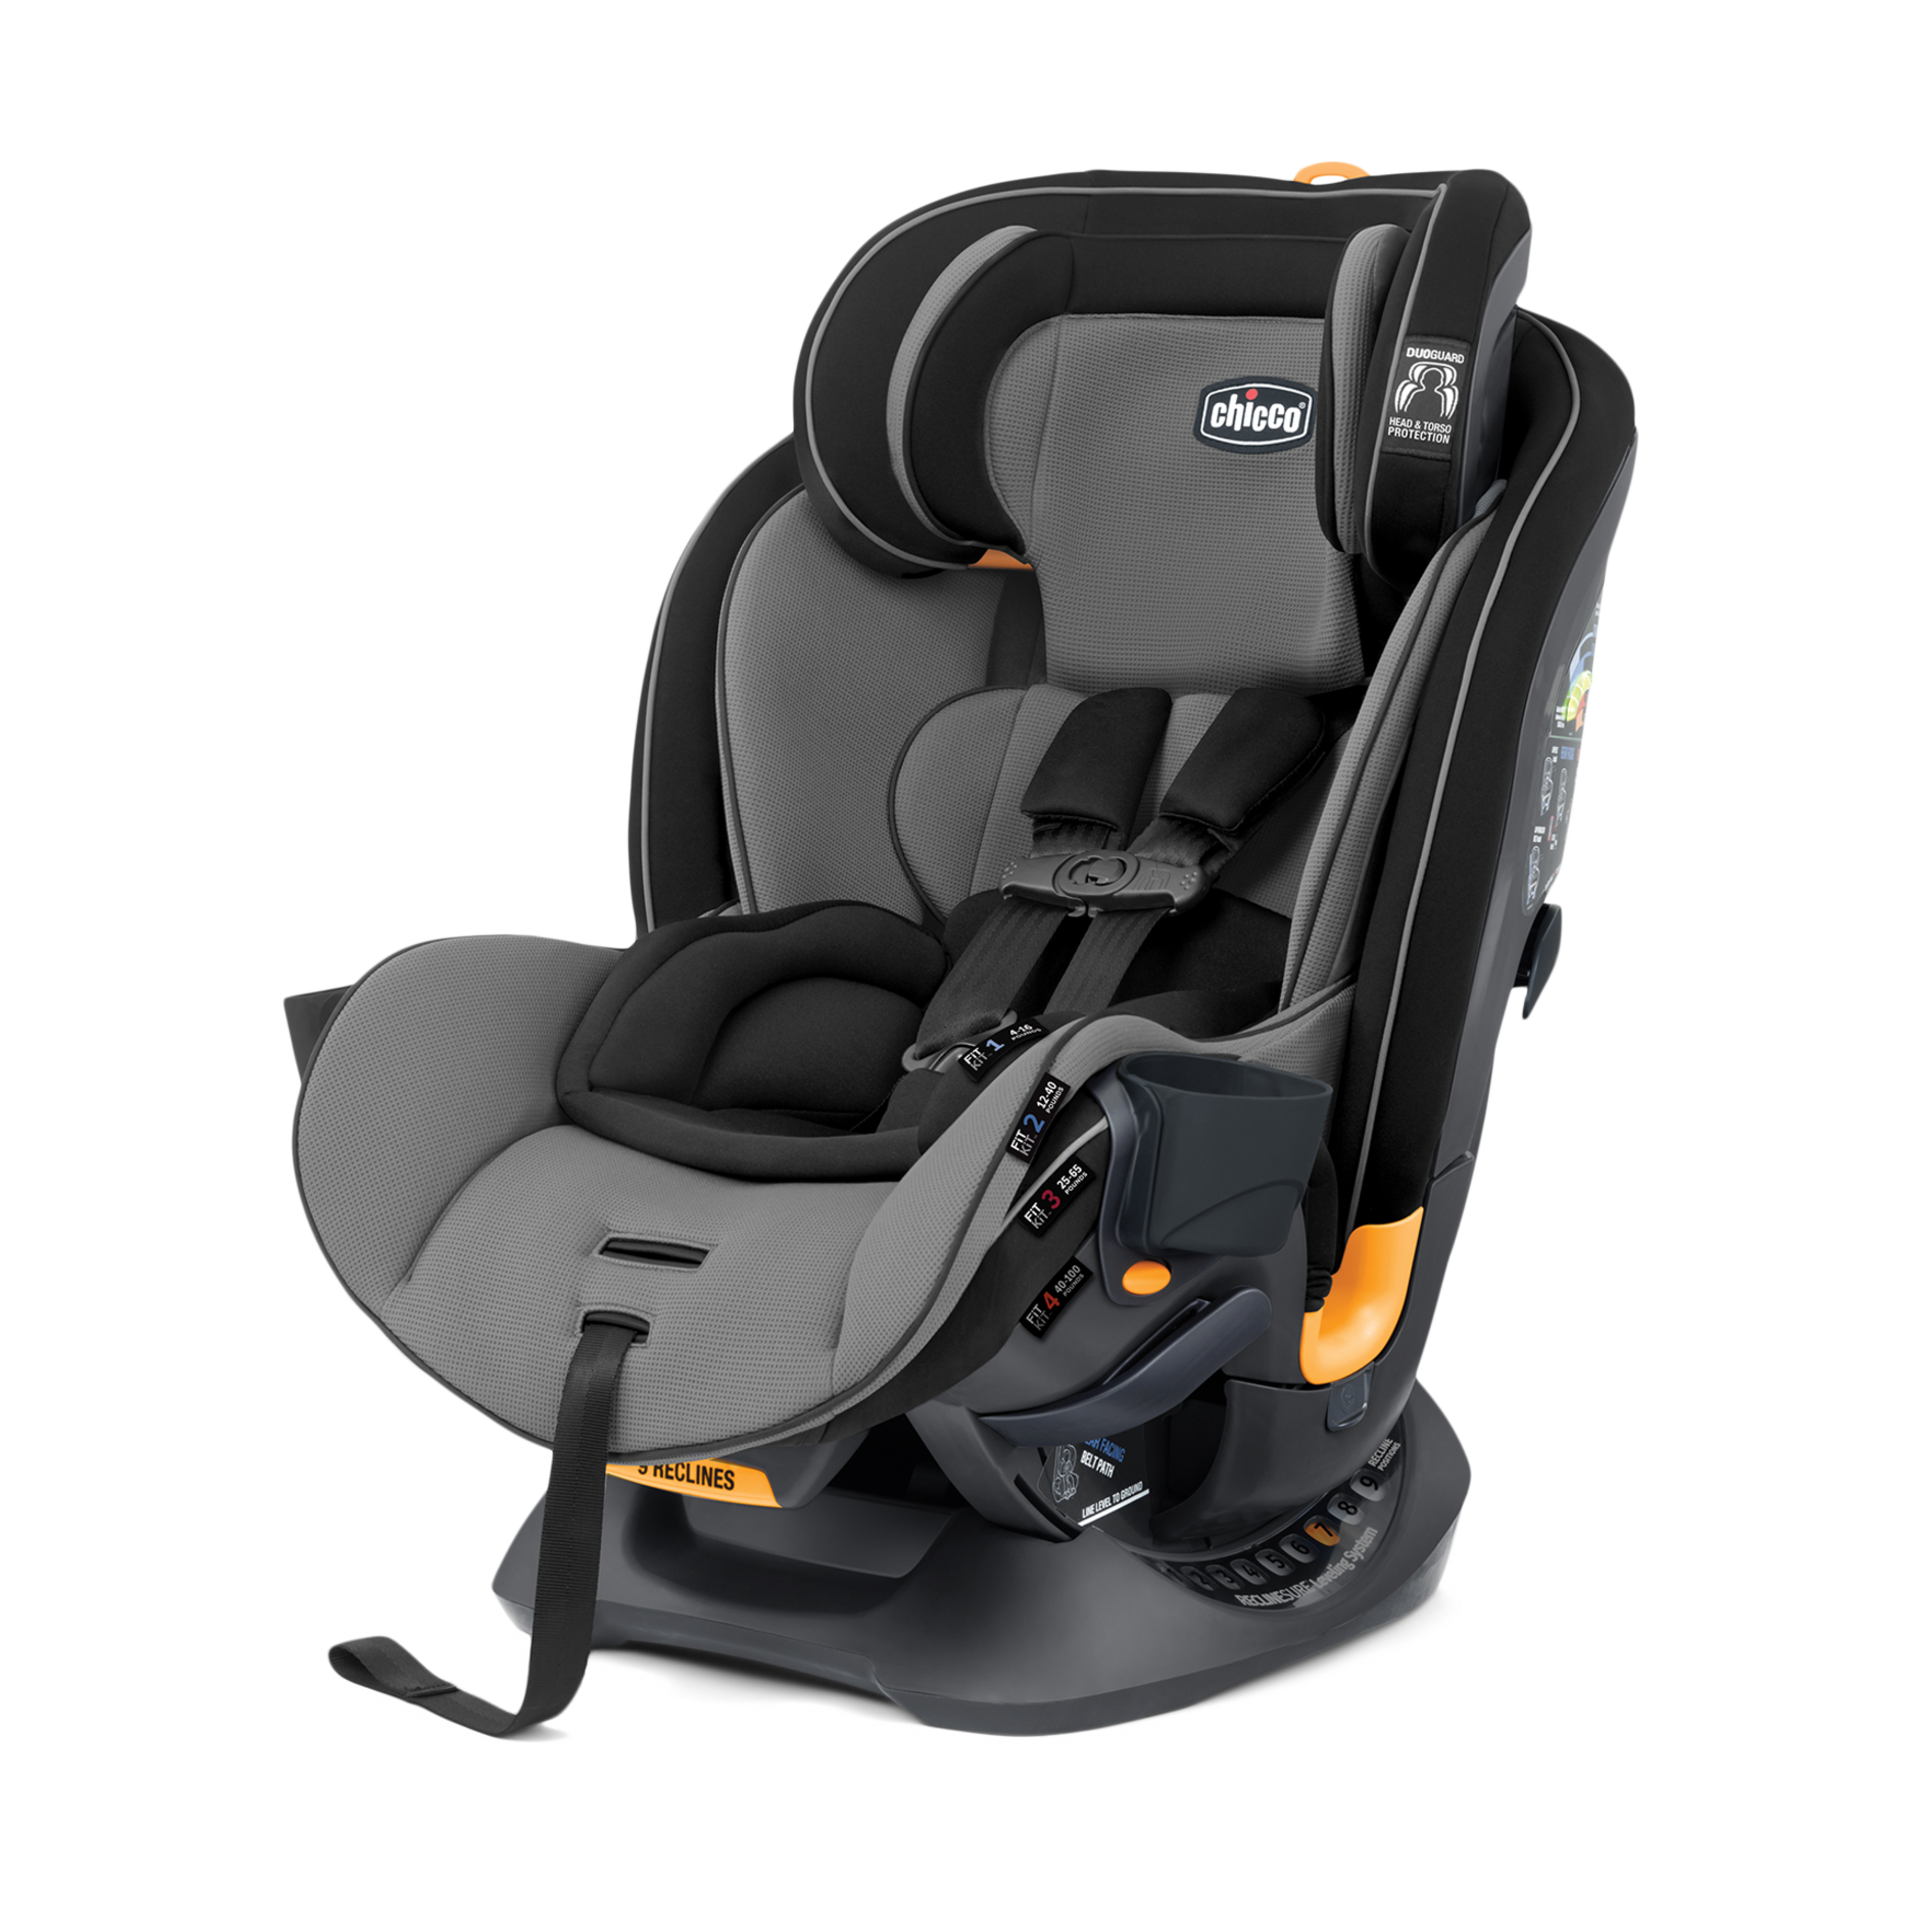 Camellia FREE SHIP Safety 1st Grow and Go Sprint 3-in-1 Convertible Car Seat 